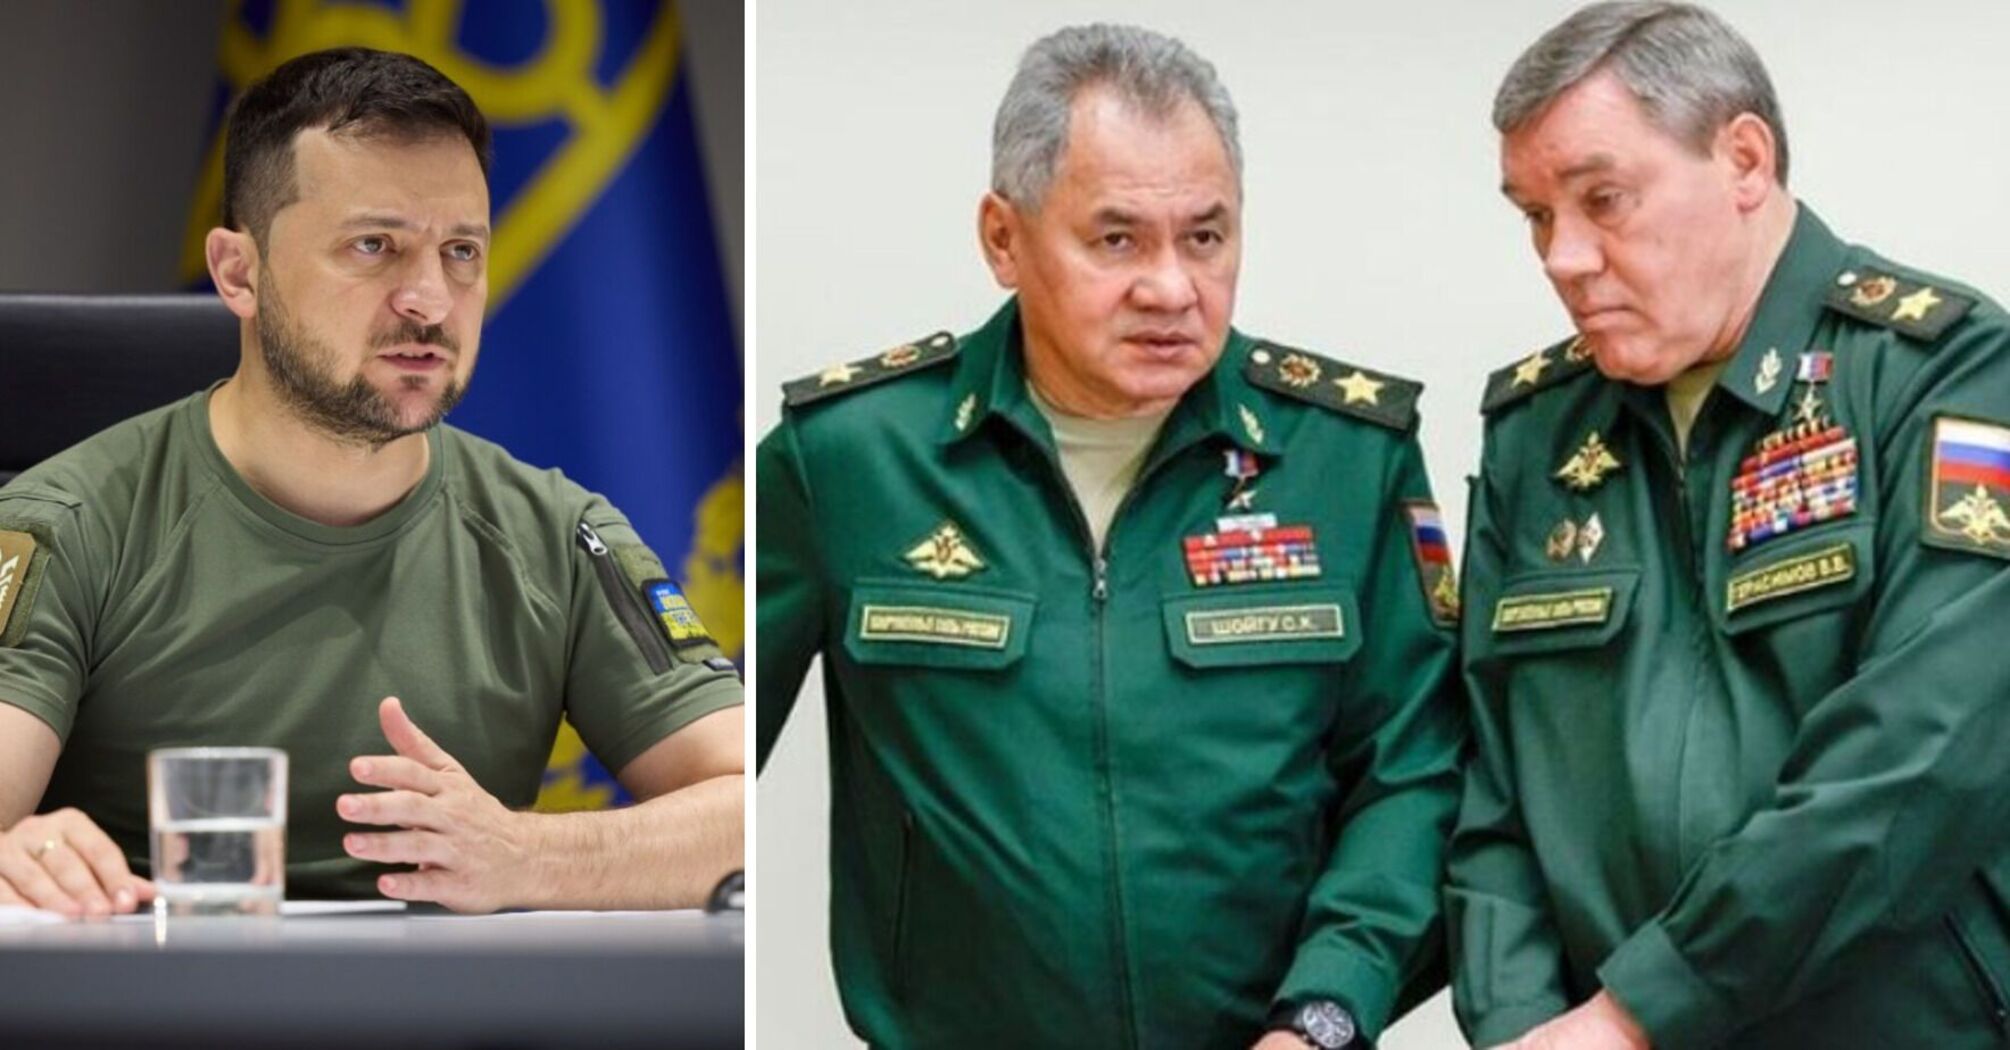 'We hope to see them behind bars': Zelenskyy welcomes ICC decision to issue arrest warrants for Shoigu and Gerasimov